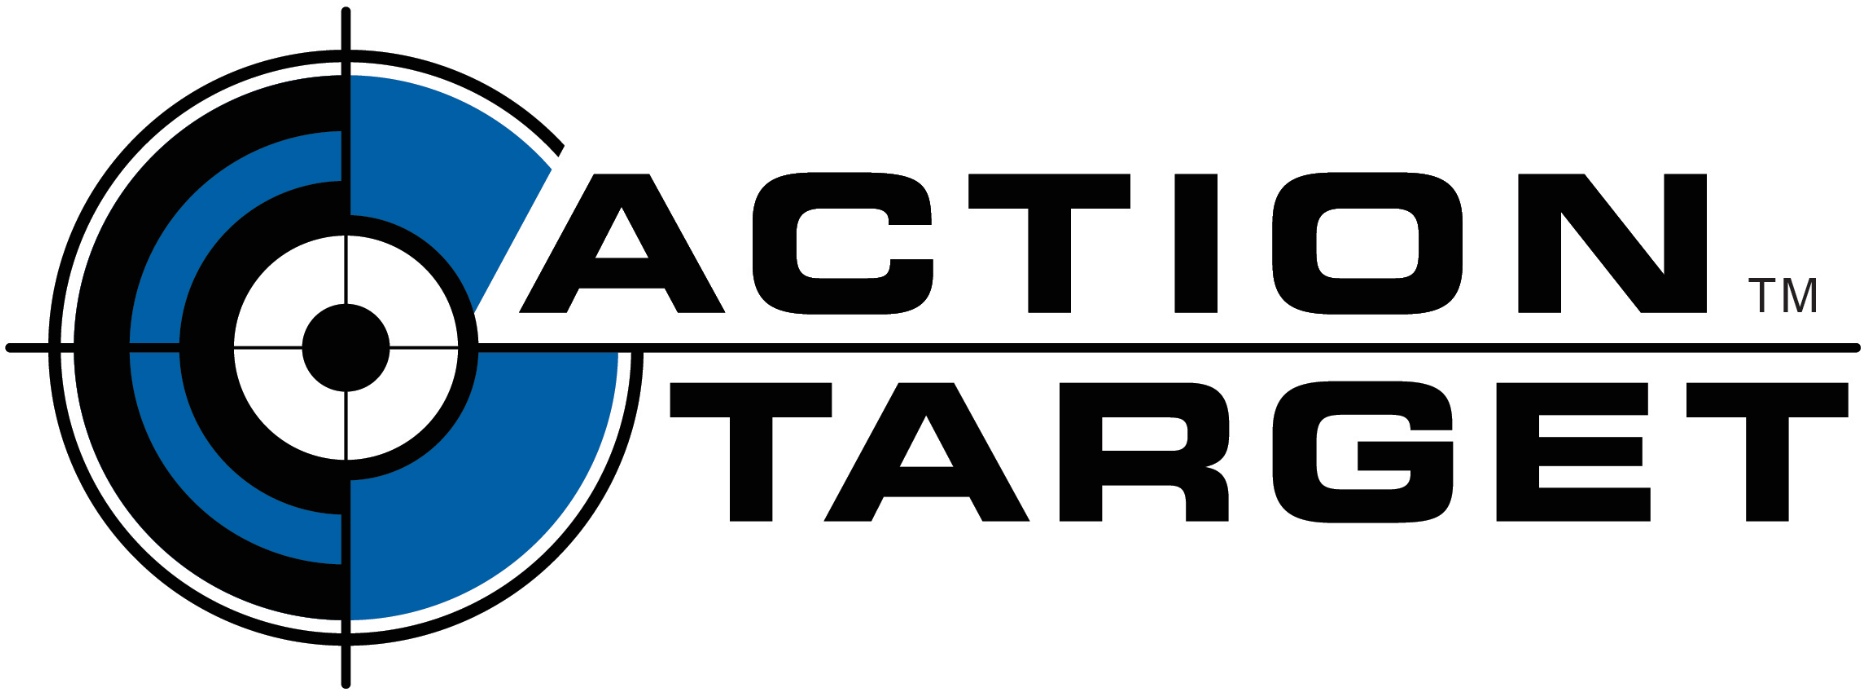 Action-Target.png